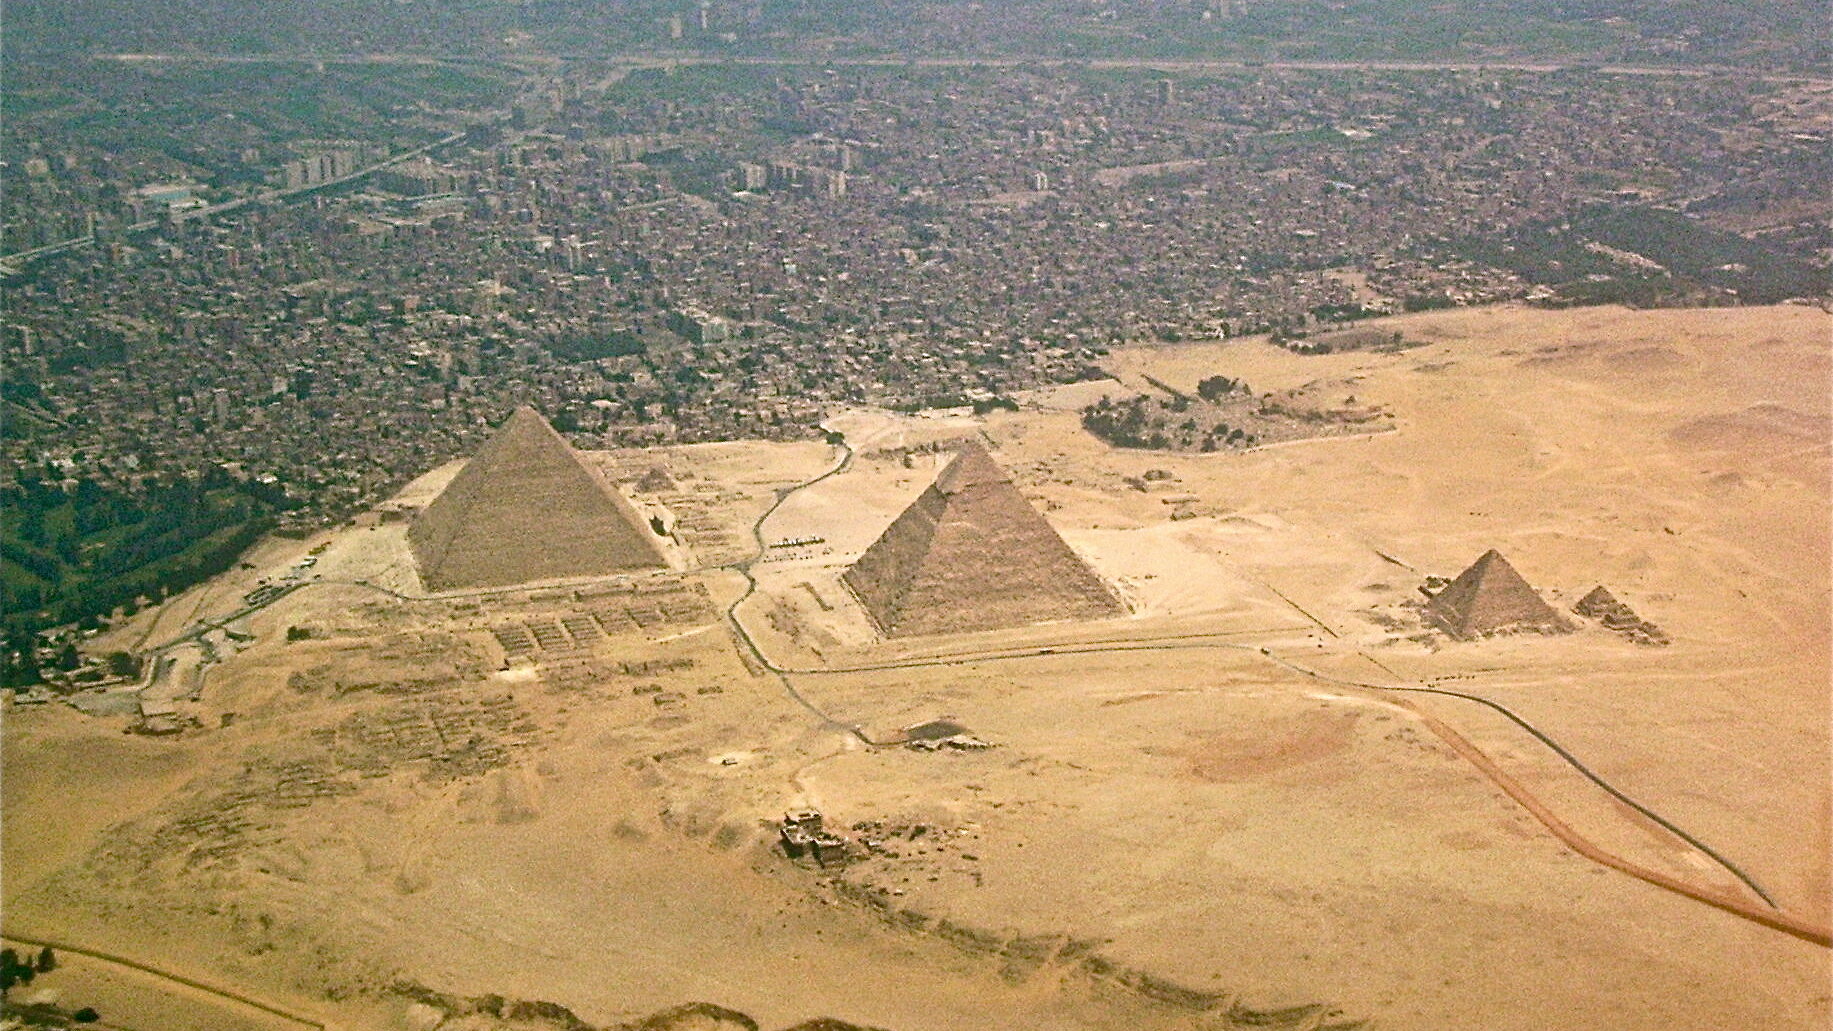 Aerial photo of the Pyramids of Giza with the city in the background